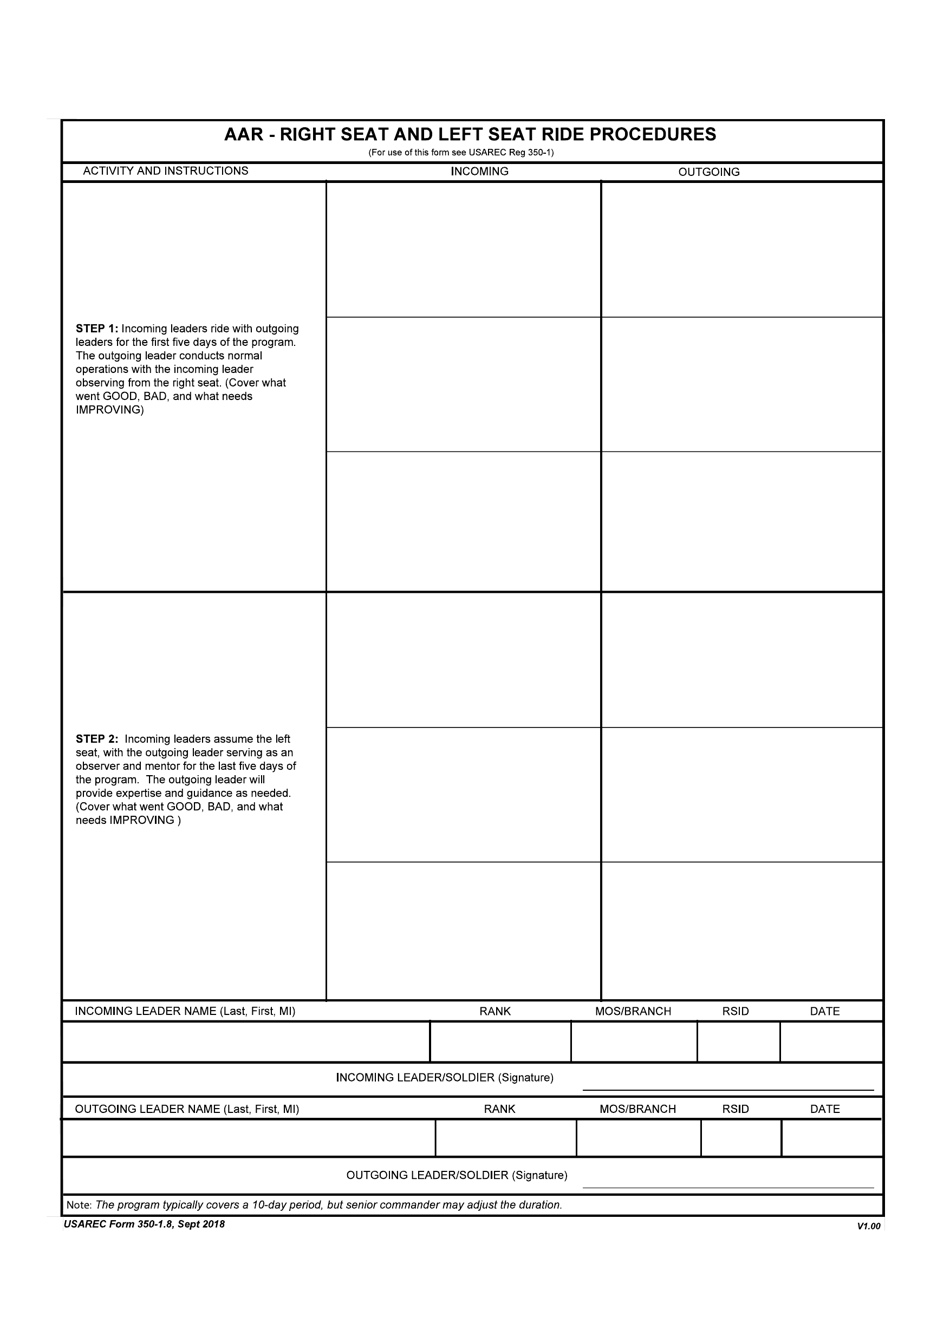 USAREC Form 350-1.8 AAR - Right Seat and Left Seat Ride Procedures, Page 1